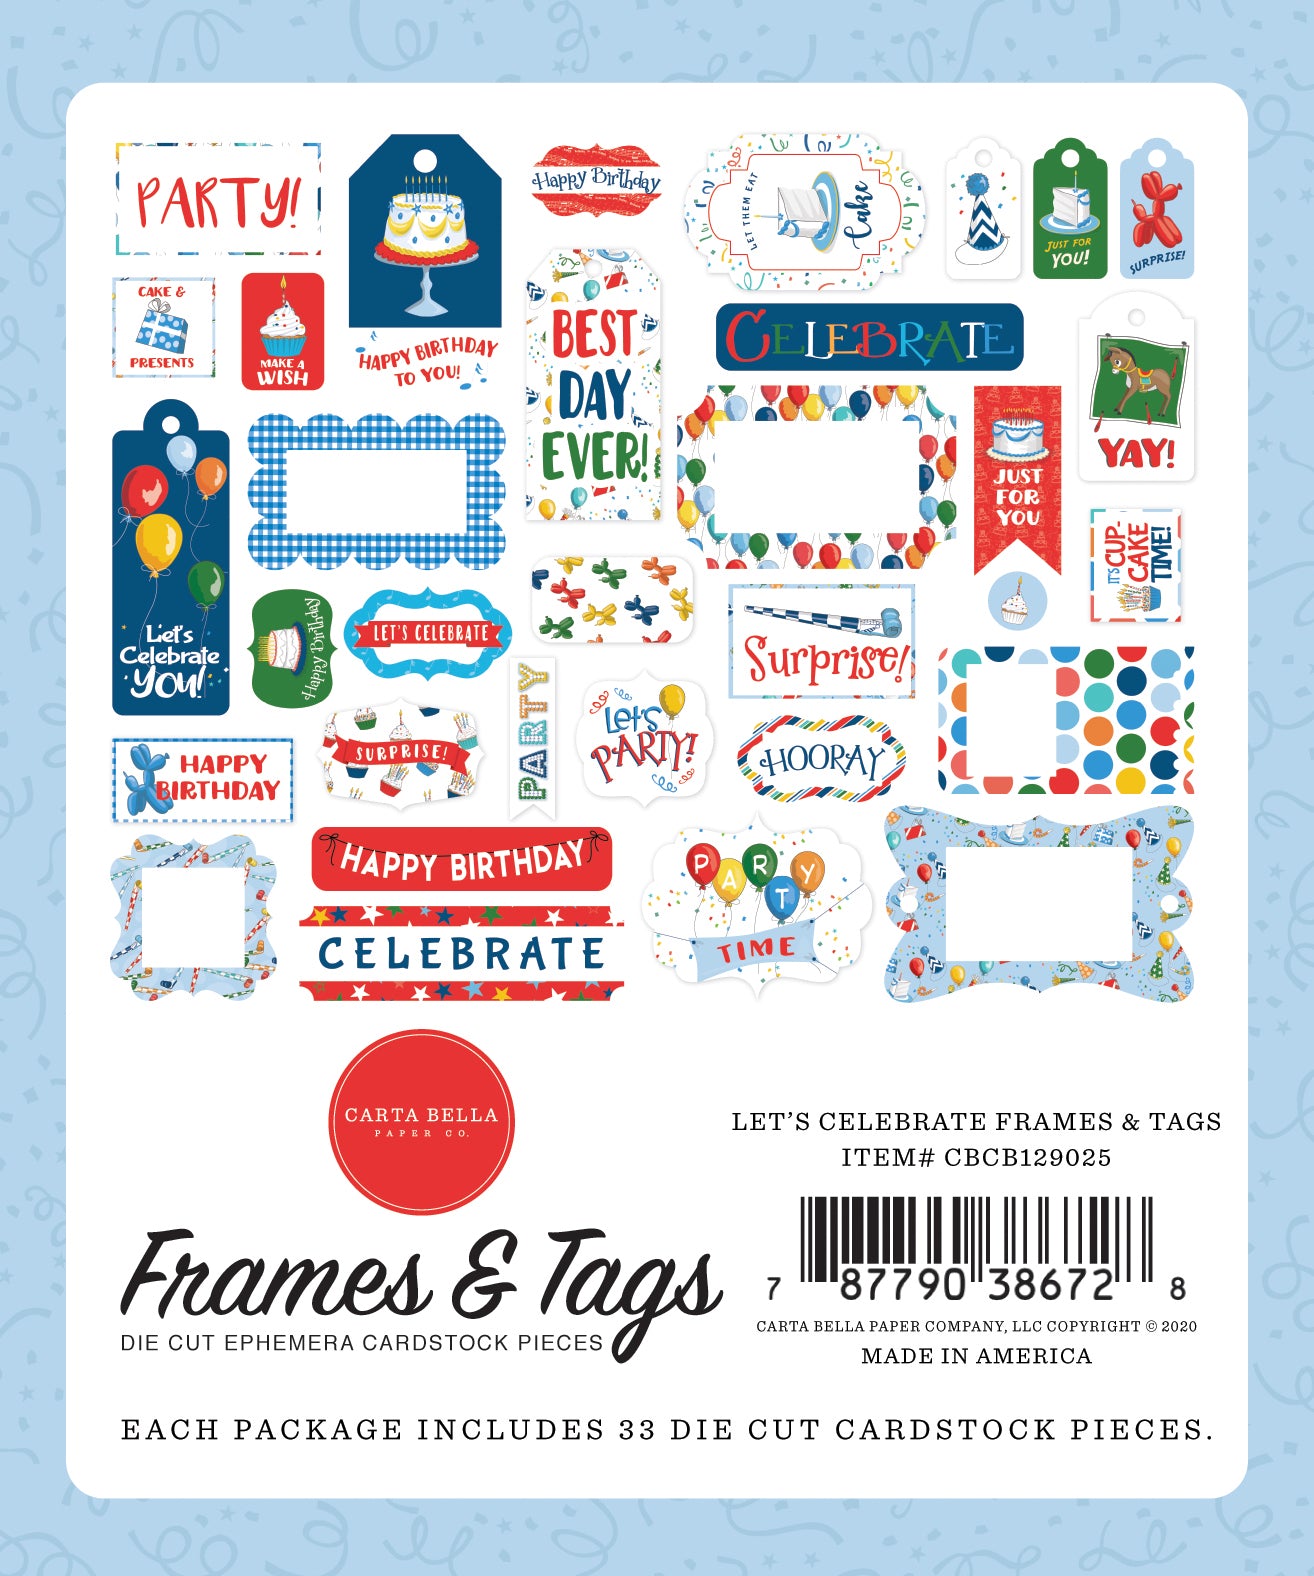 Let's Celebrate Frames & Tags Die Cut Cardstock Pack.  Pack includes 33 different die-cut shapes ready to embellish any project.